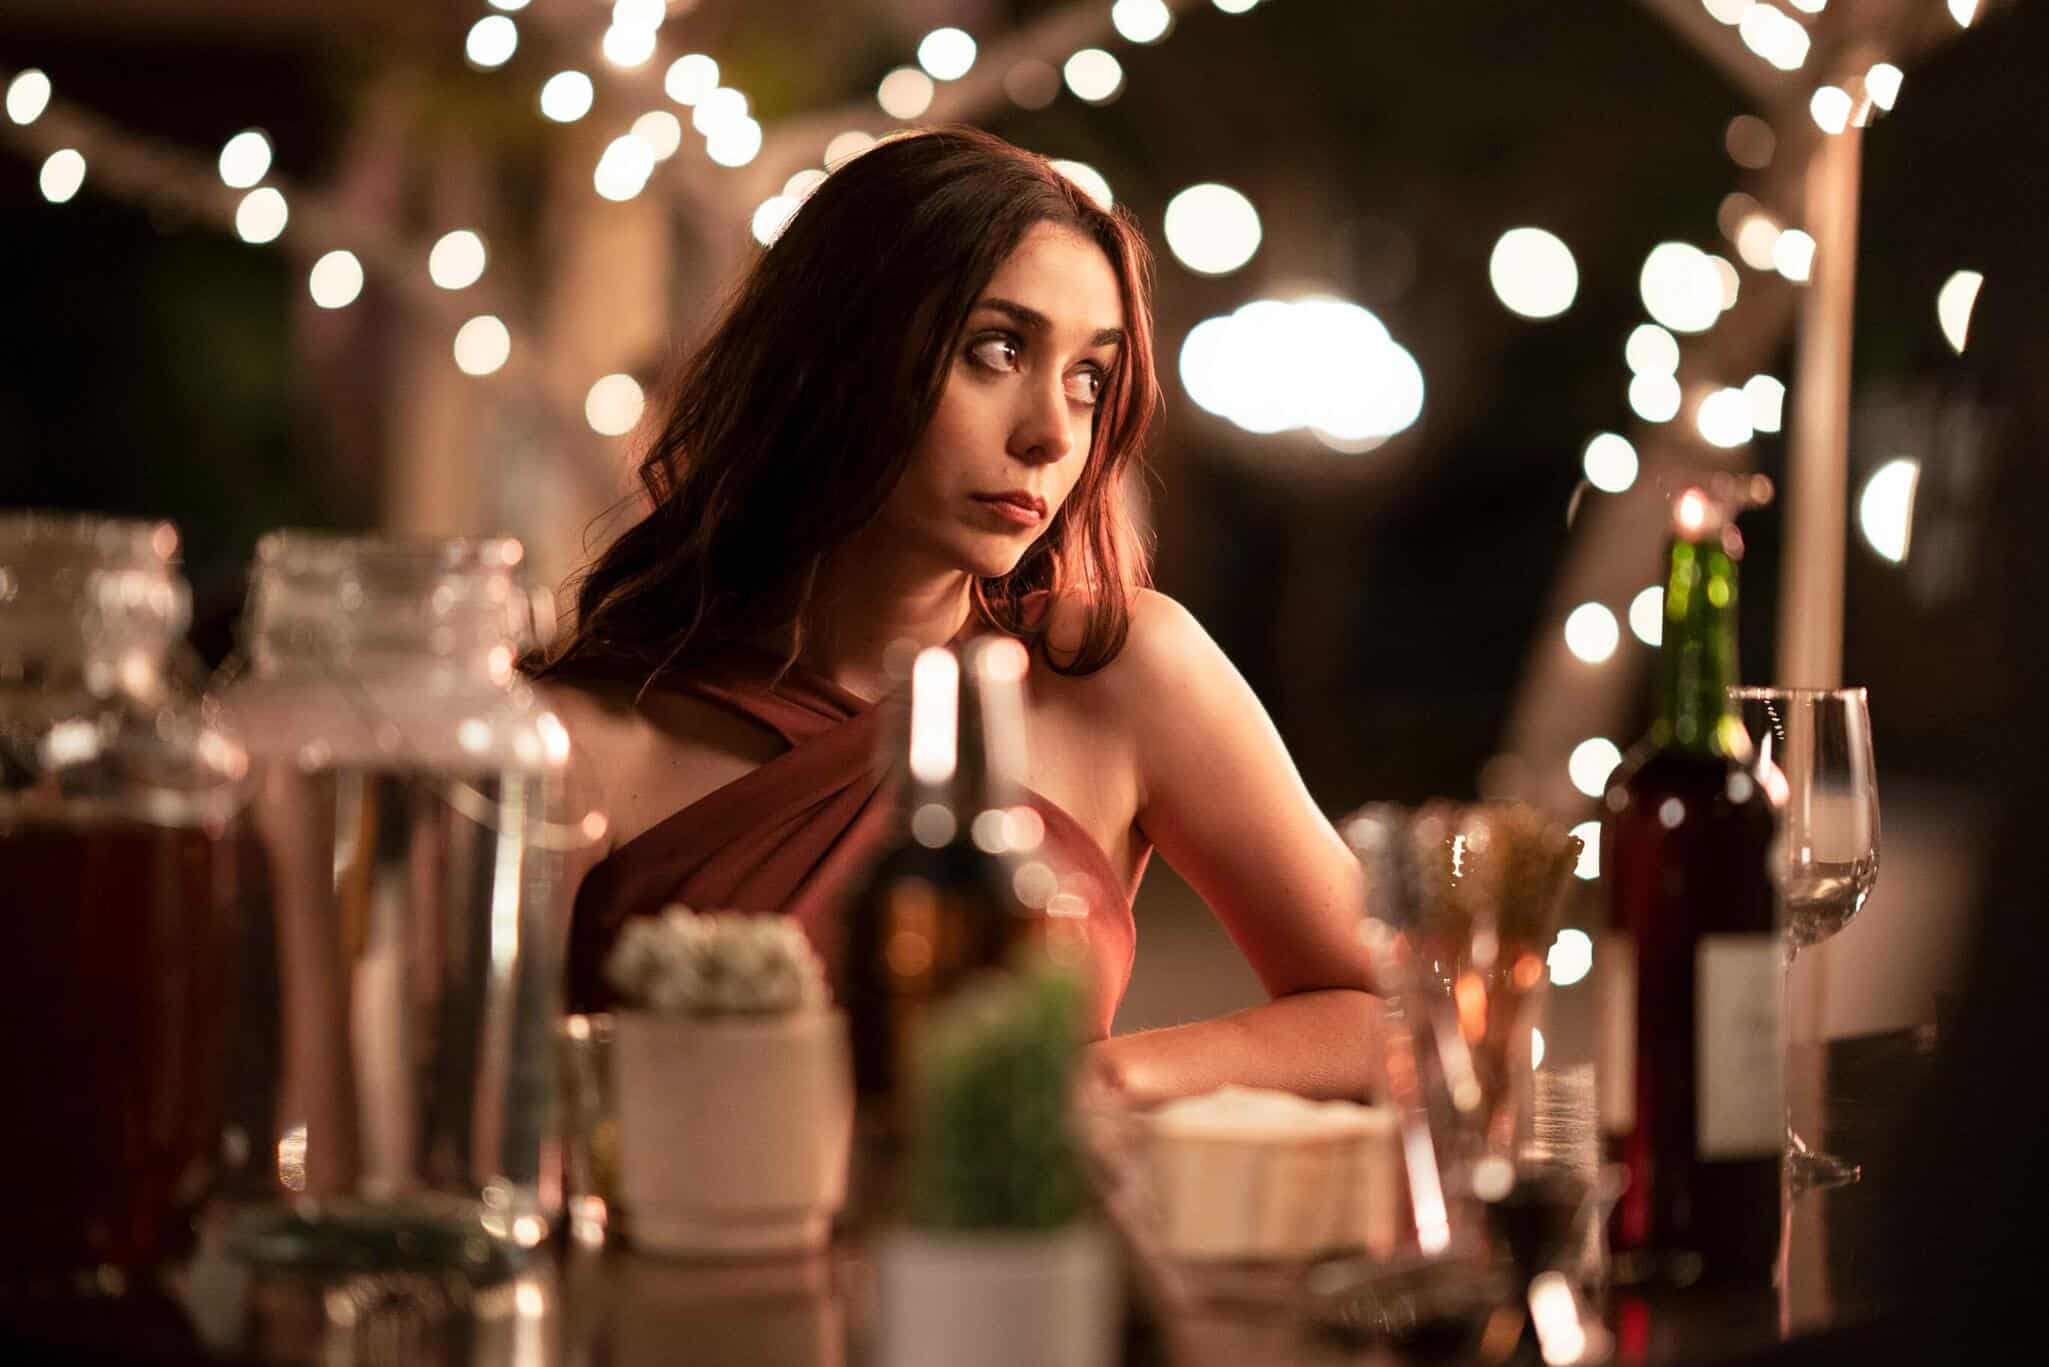 A woman stands near the bar at an outdoor party in this image from Limelight Productions.